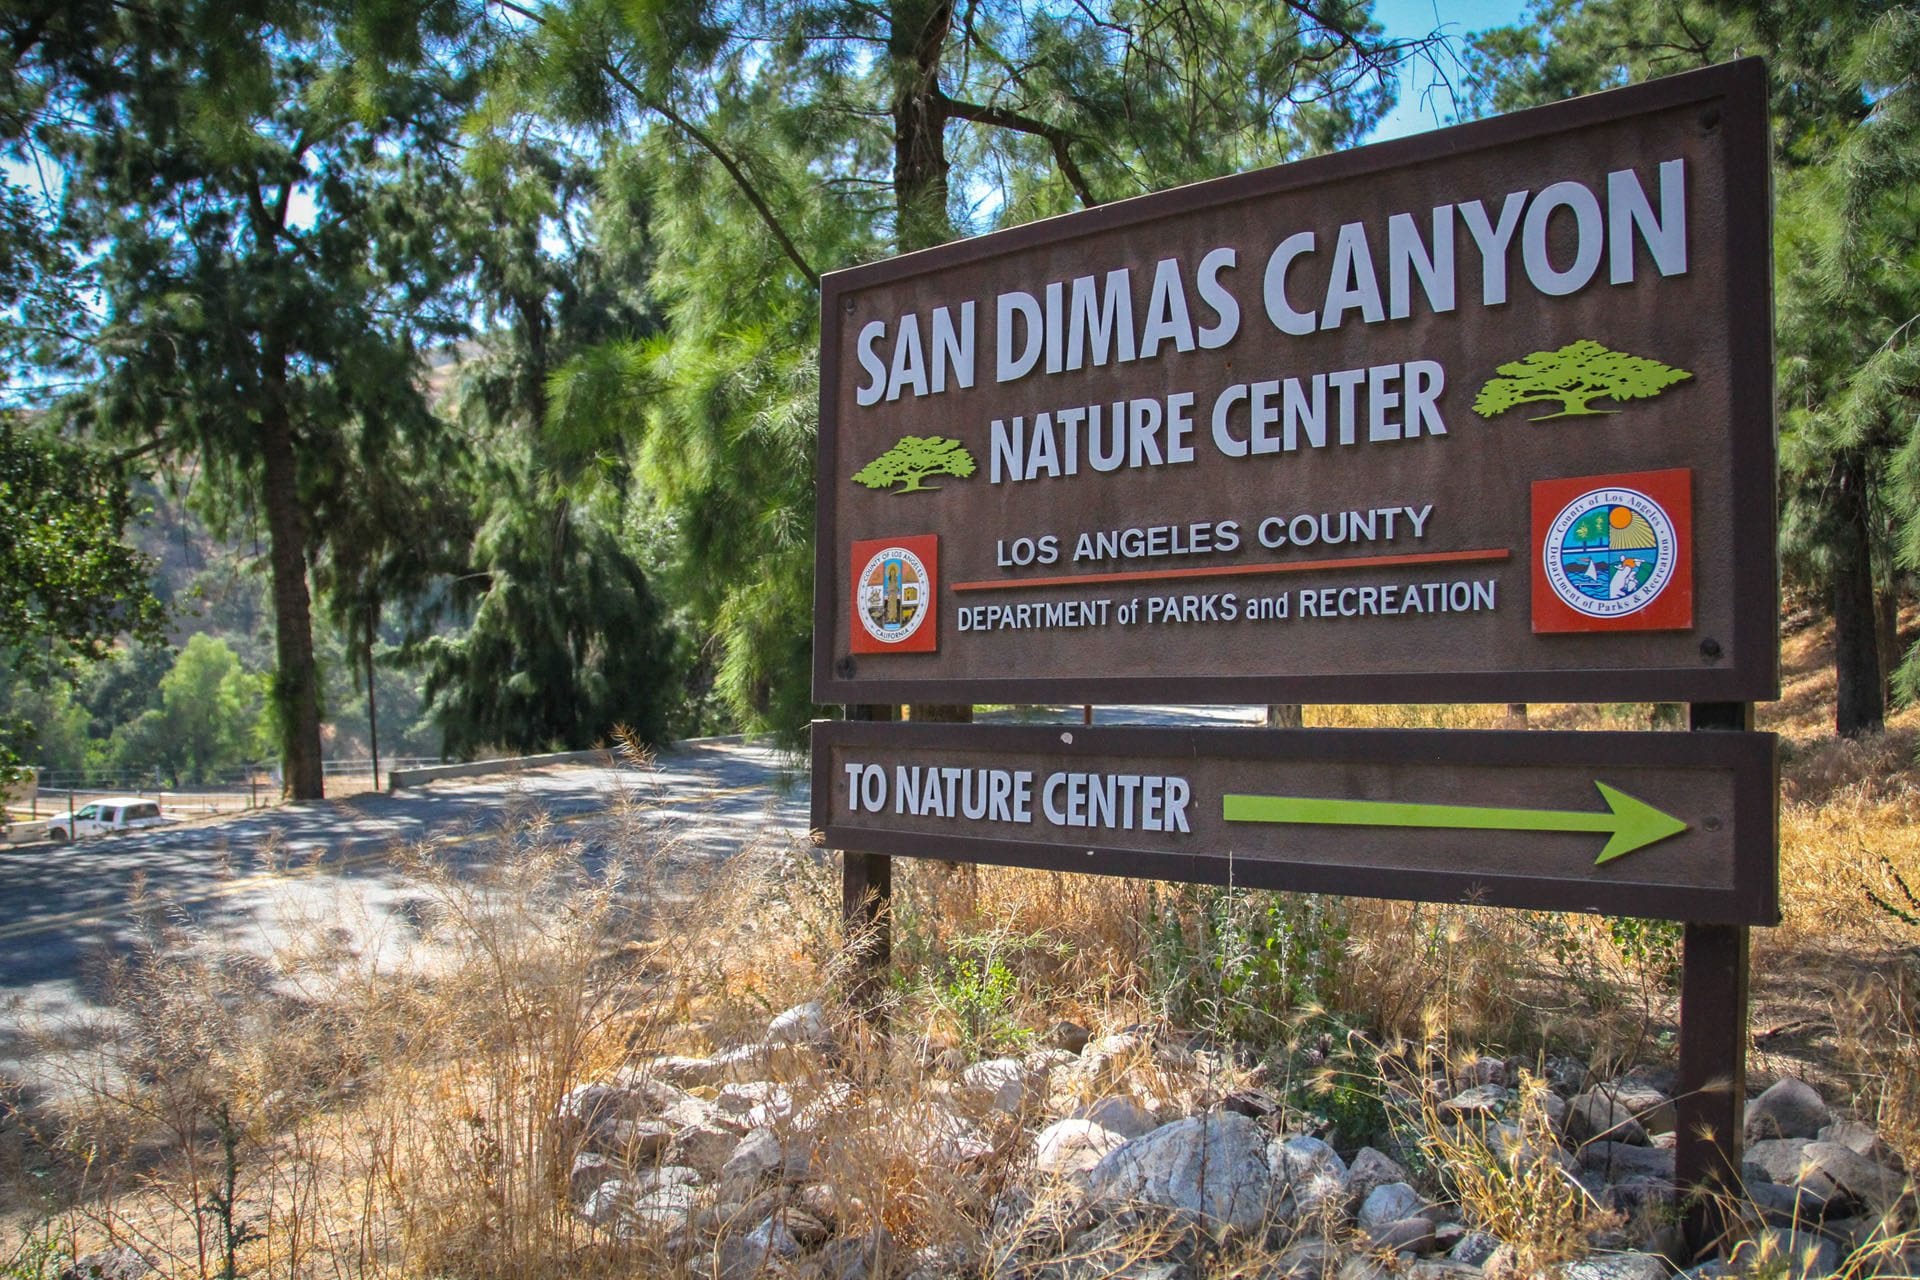 12 Things To Do In San Dimas With Kids